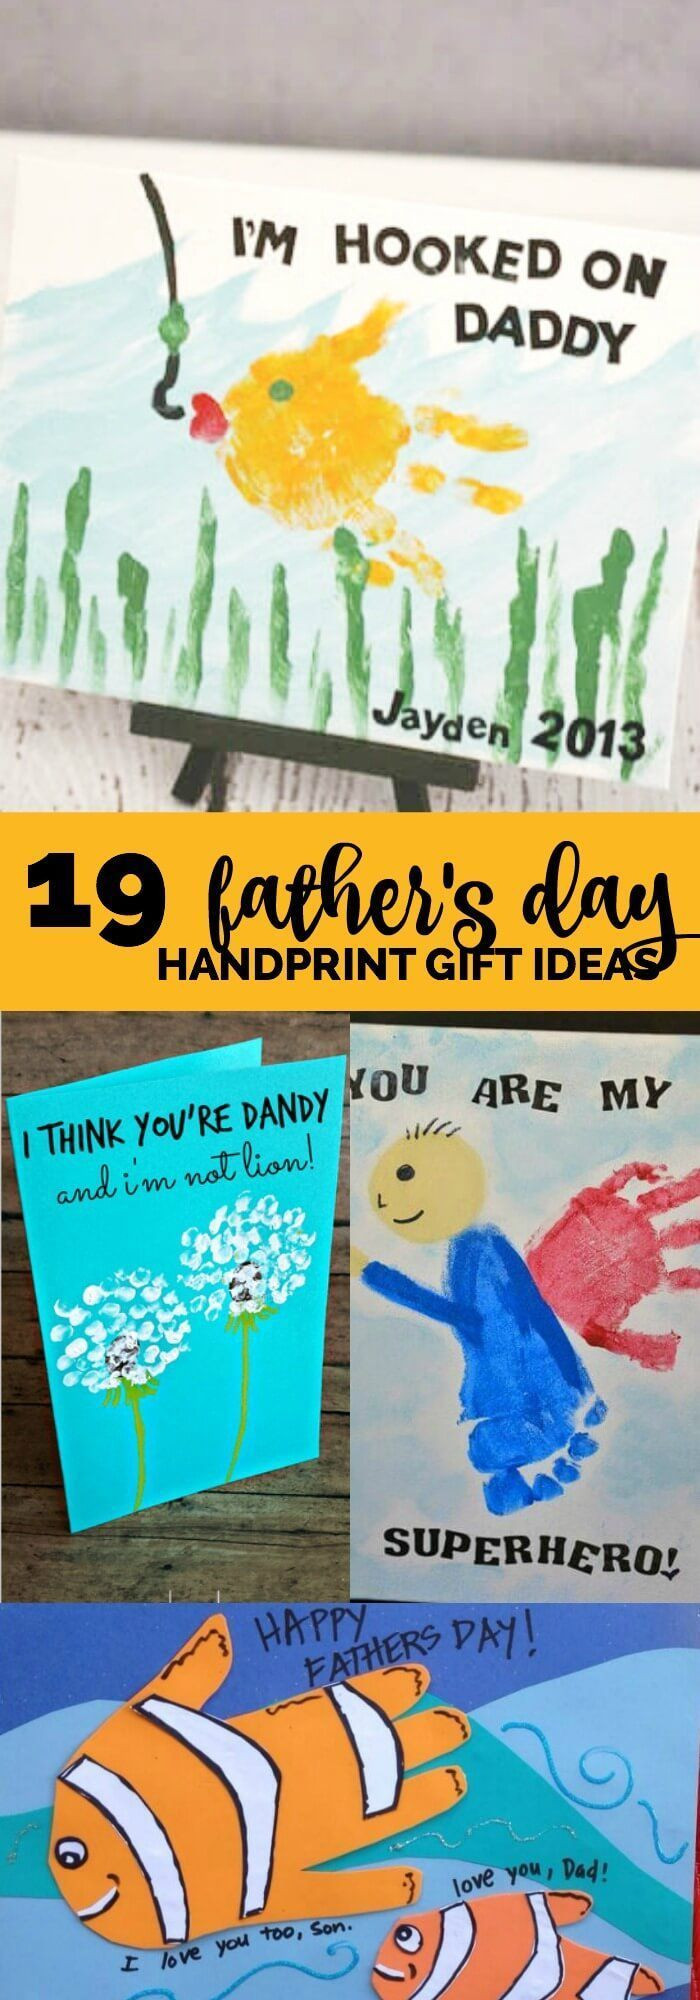 Father'S Day Gift Ideas From Son
 19 Father’s Day Handprint Gift Ideas